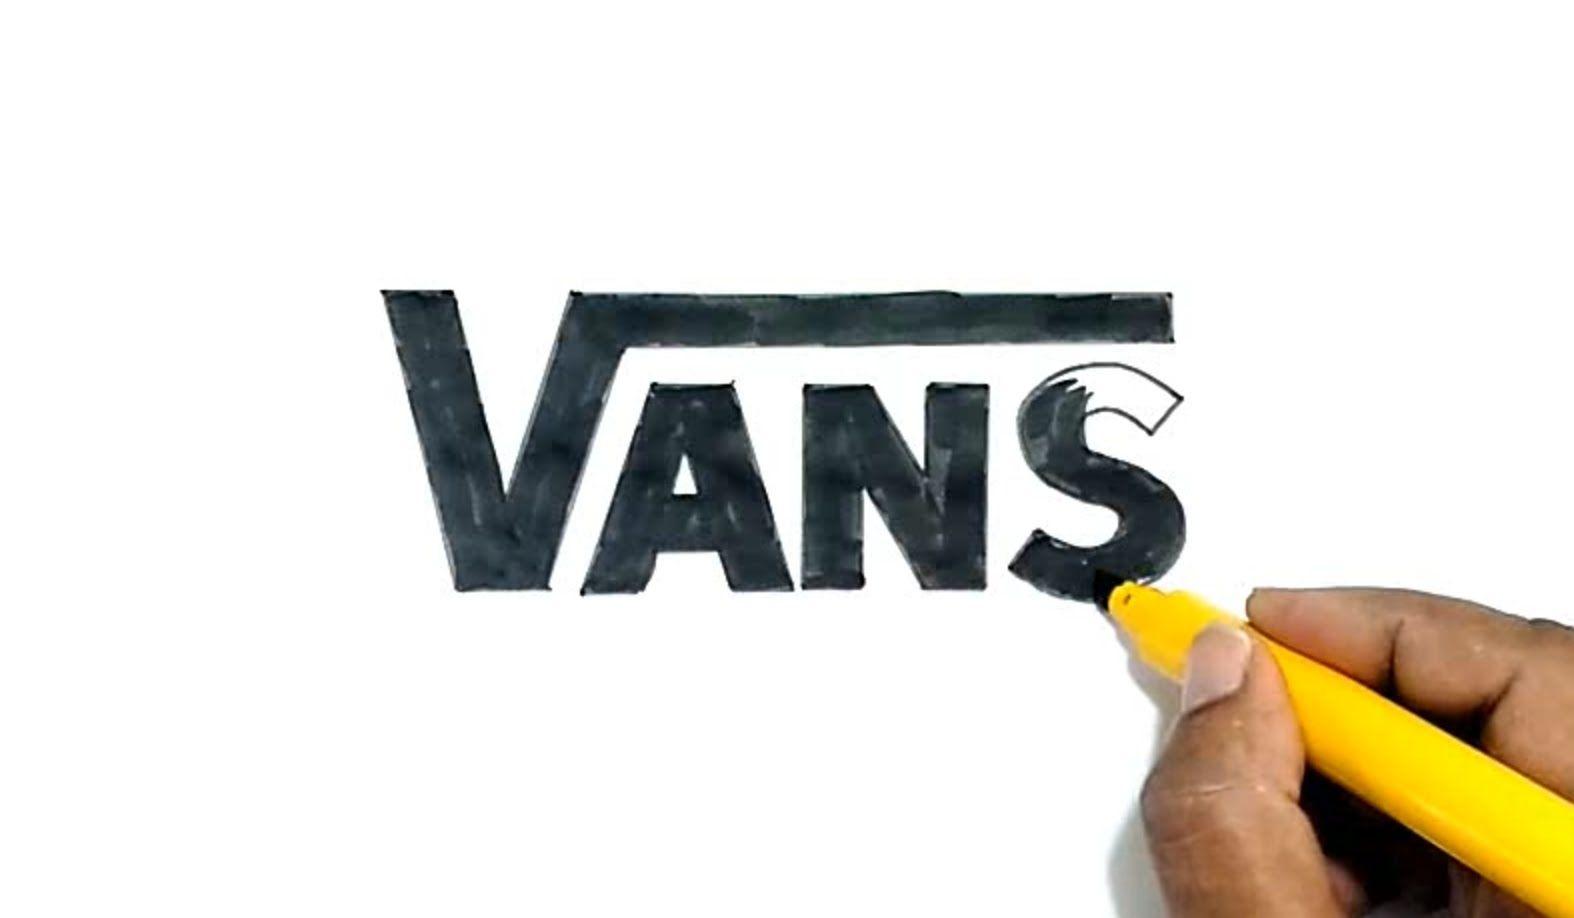 From Vans Logo - How to Draw the Vans Logo - YouTube